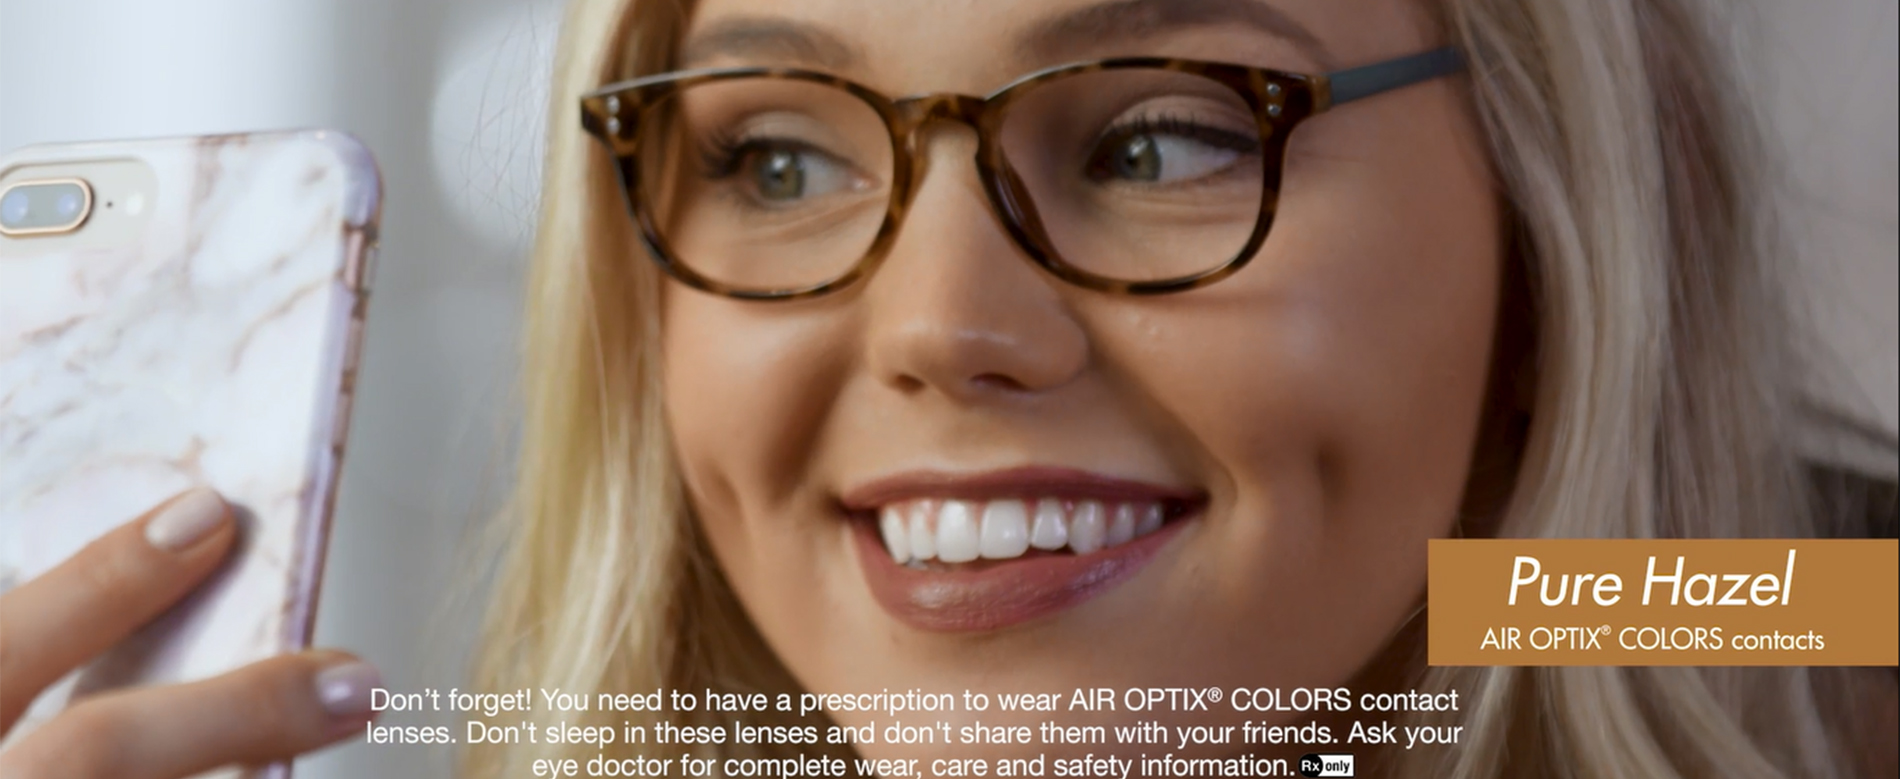 alcon-introduces-air-optix-colors-contact-lenses-gemstone-collection